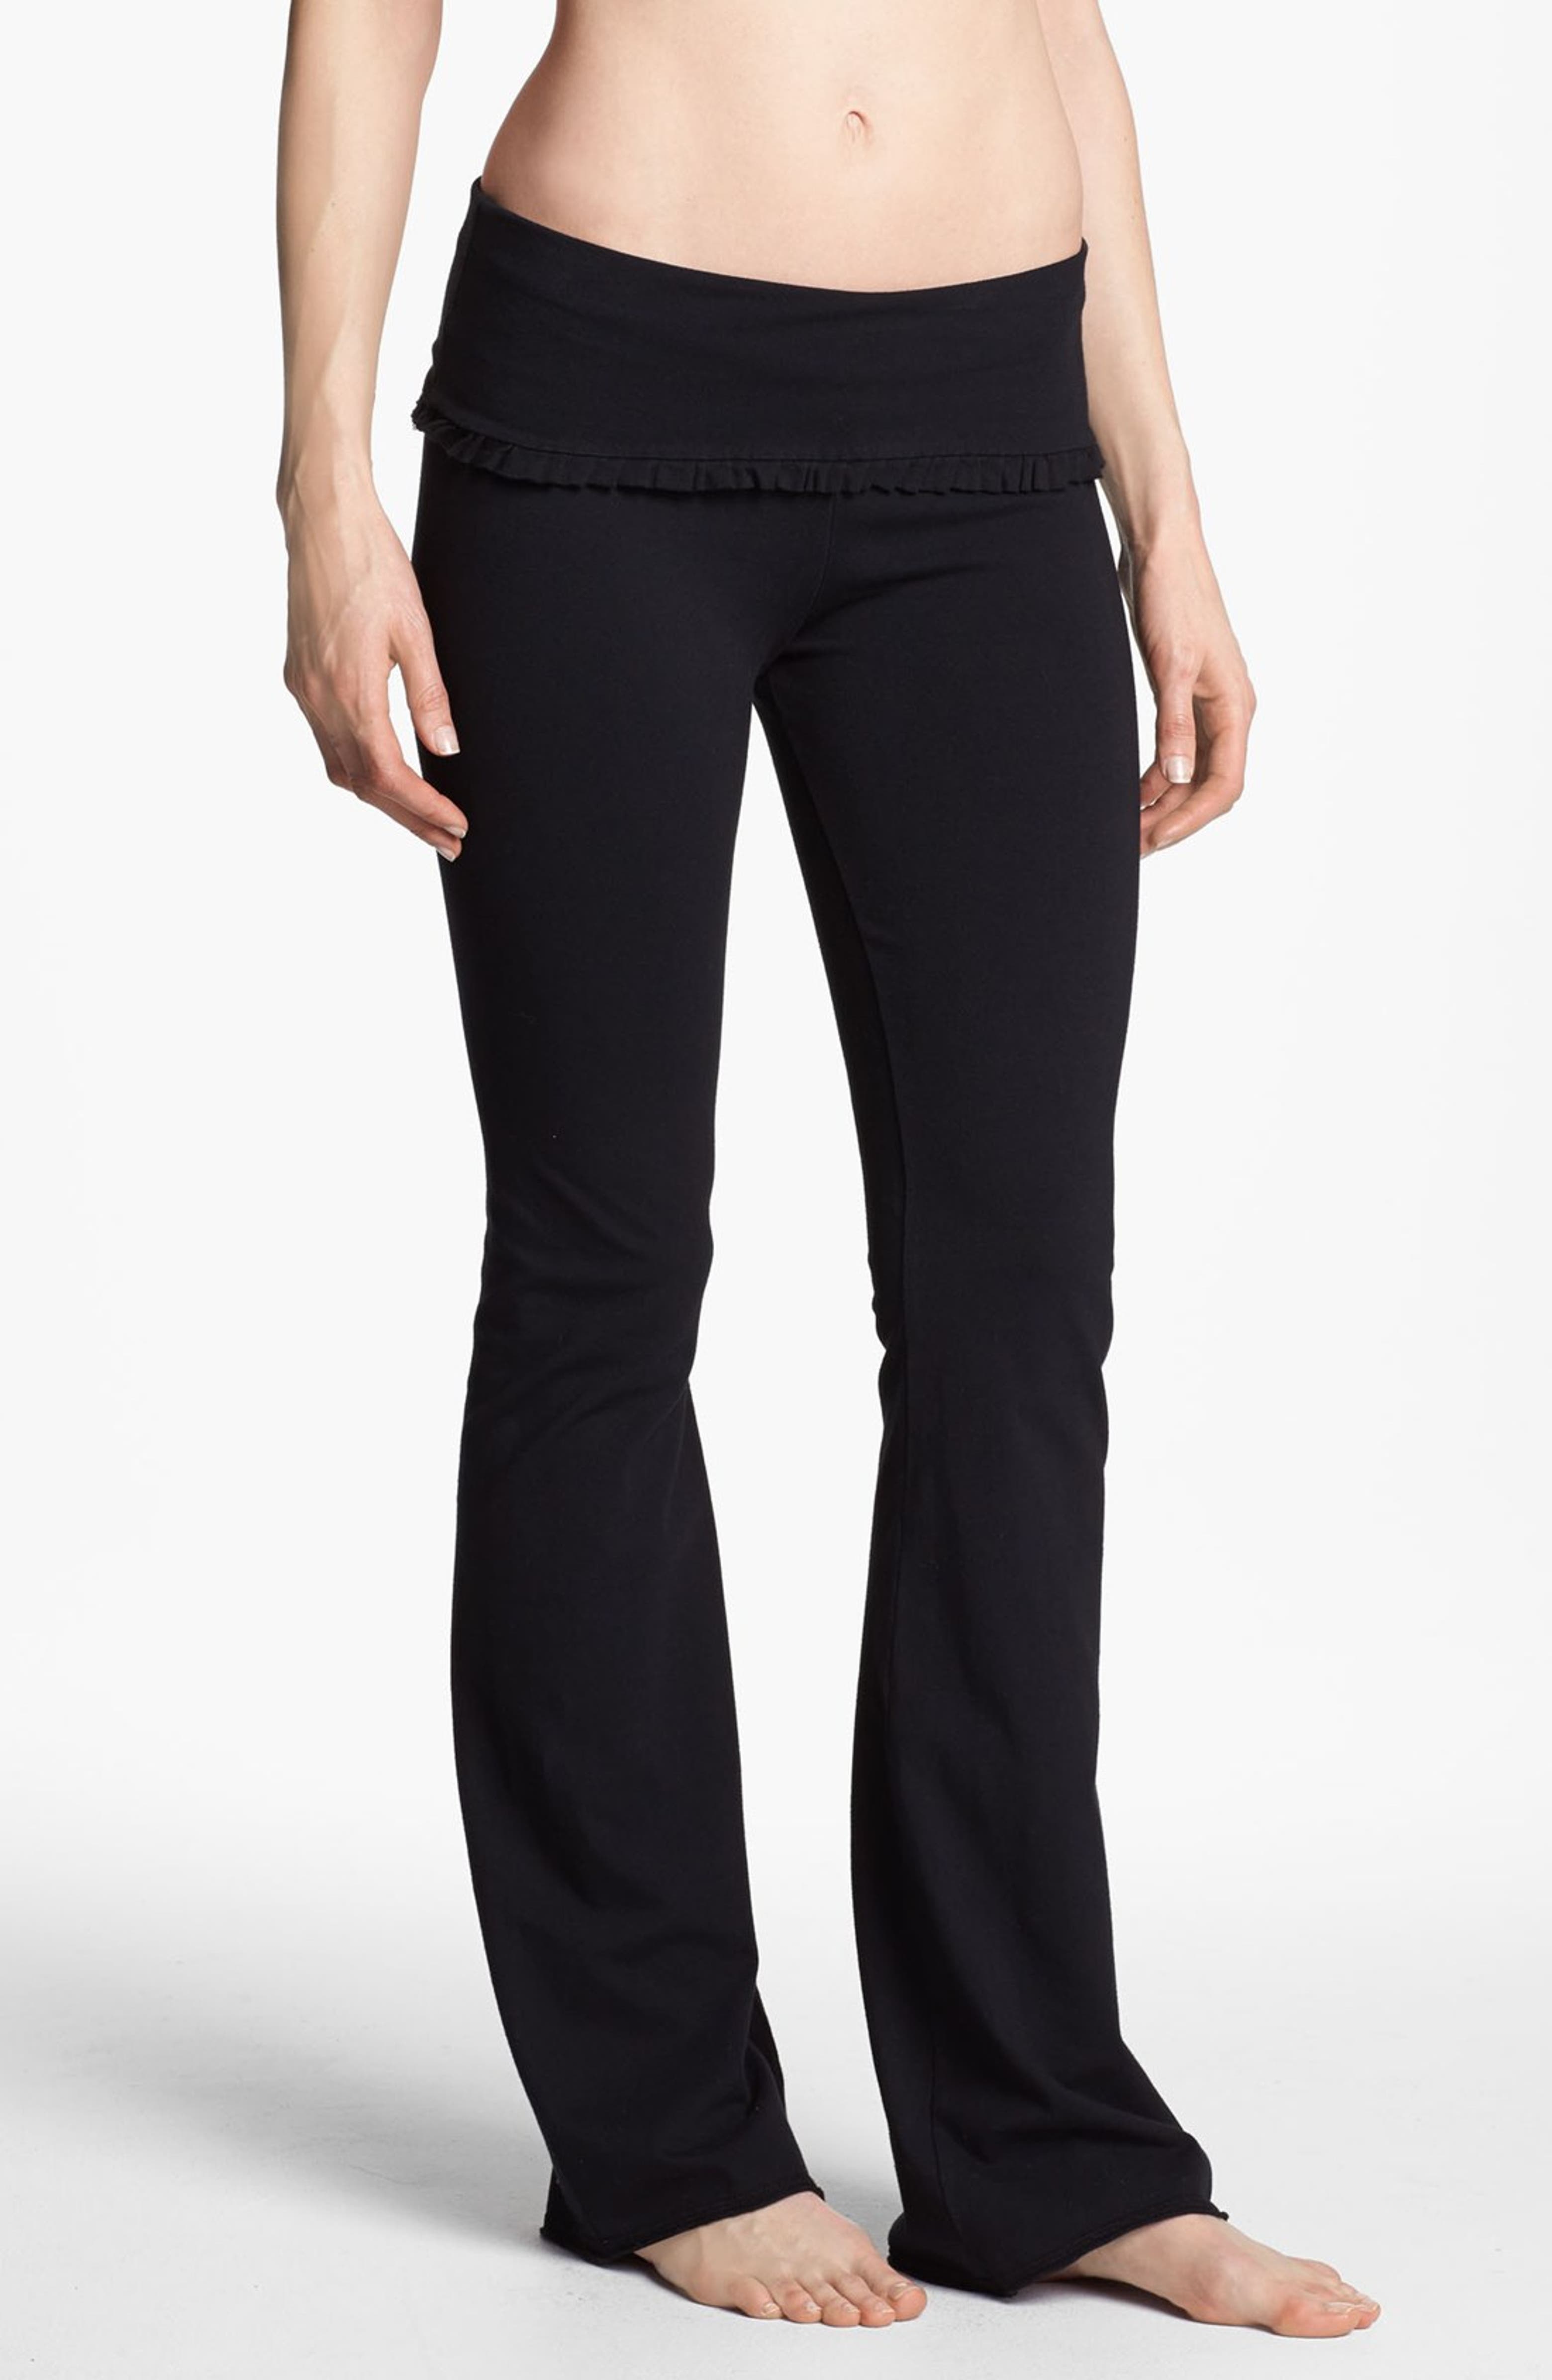 Solow Ruffle Foldover Pants | Nordstrom